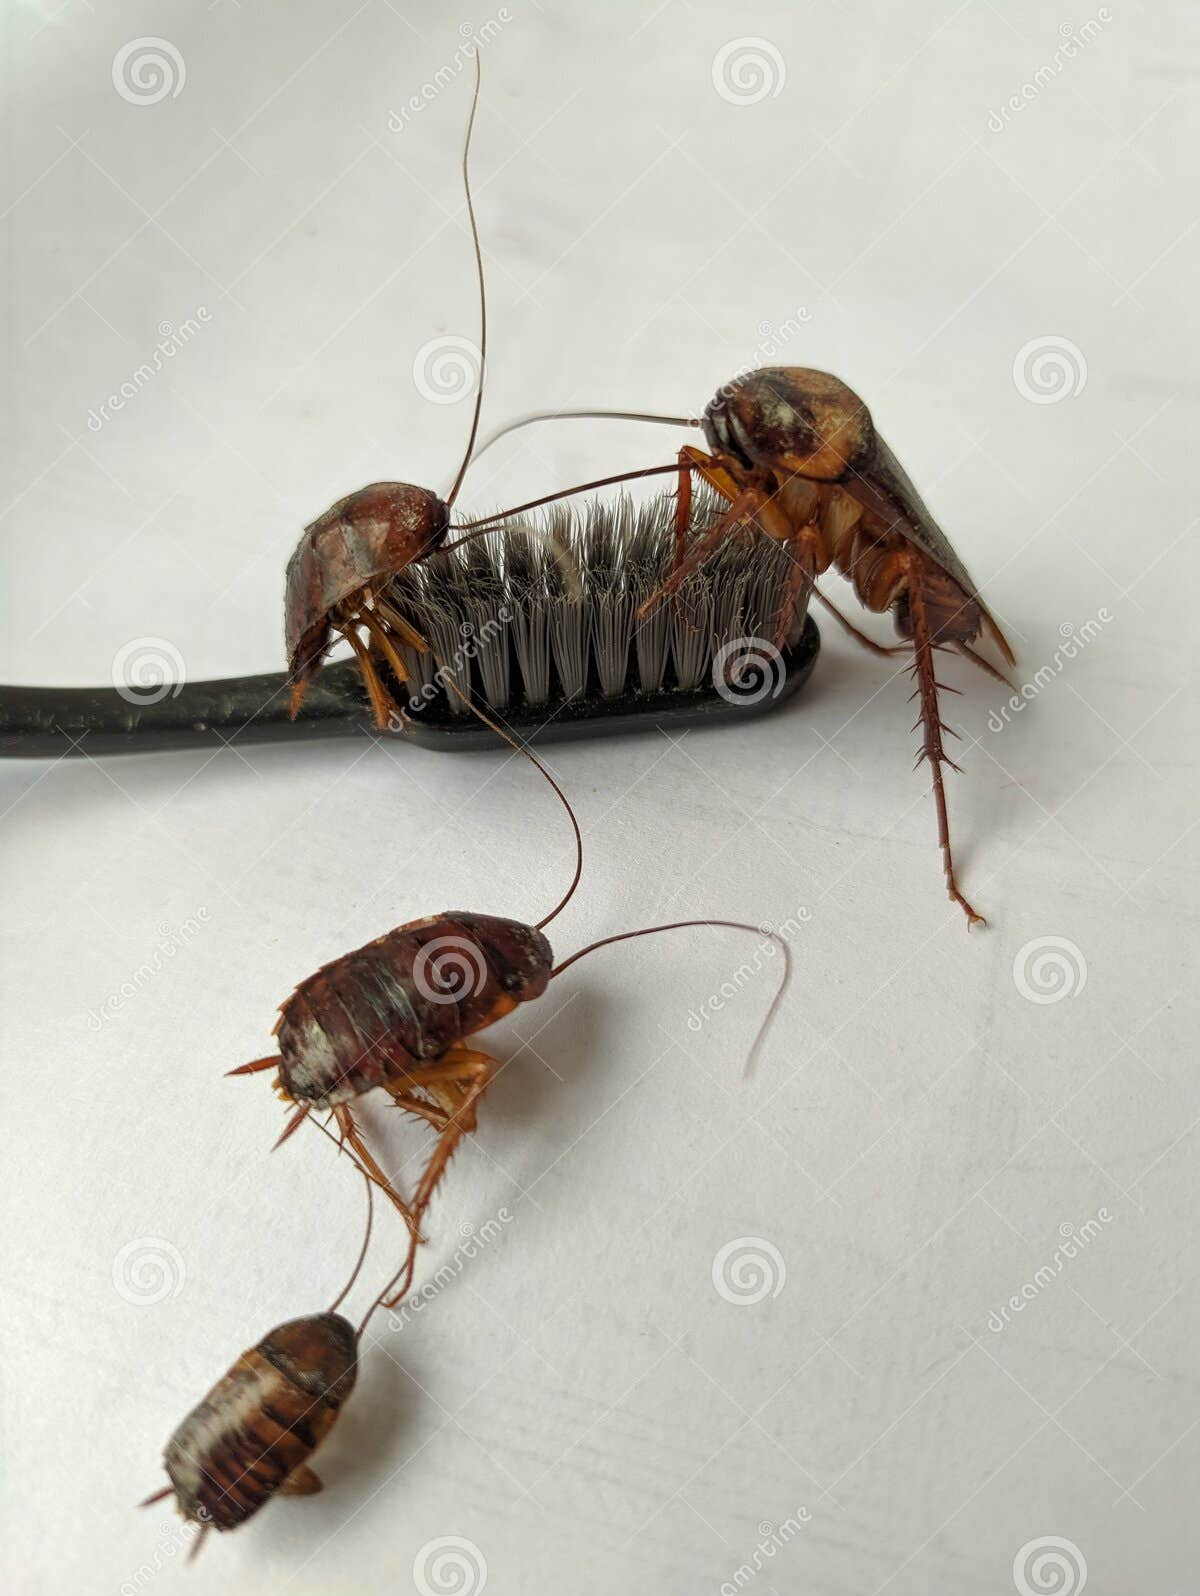 CURSED COCKROACHES ARE BRUSHING THEIR TEETH! Blank Meme Template